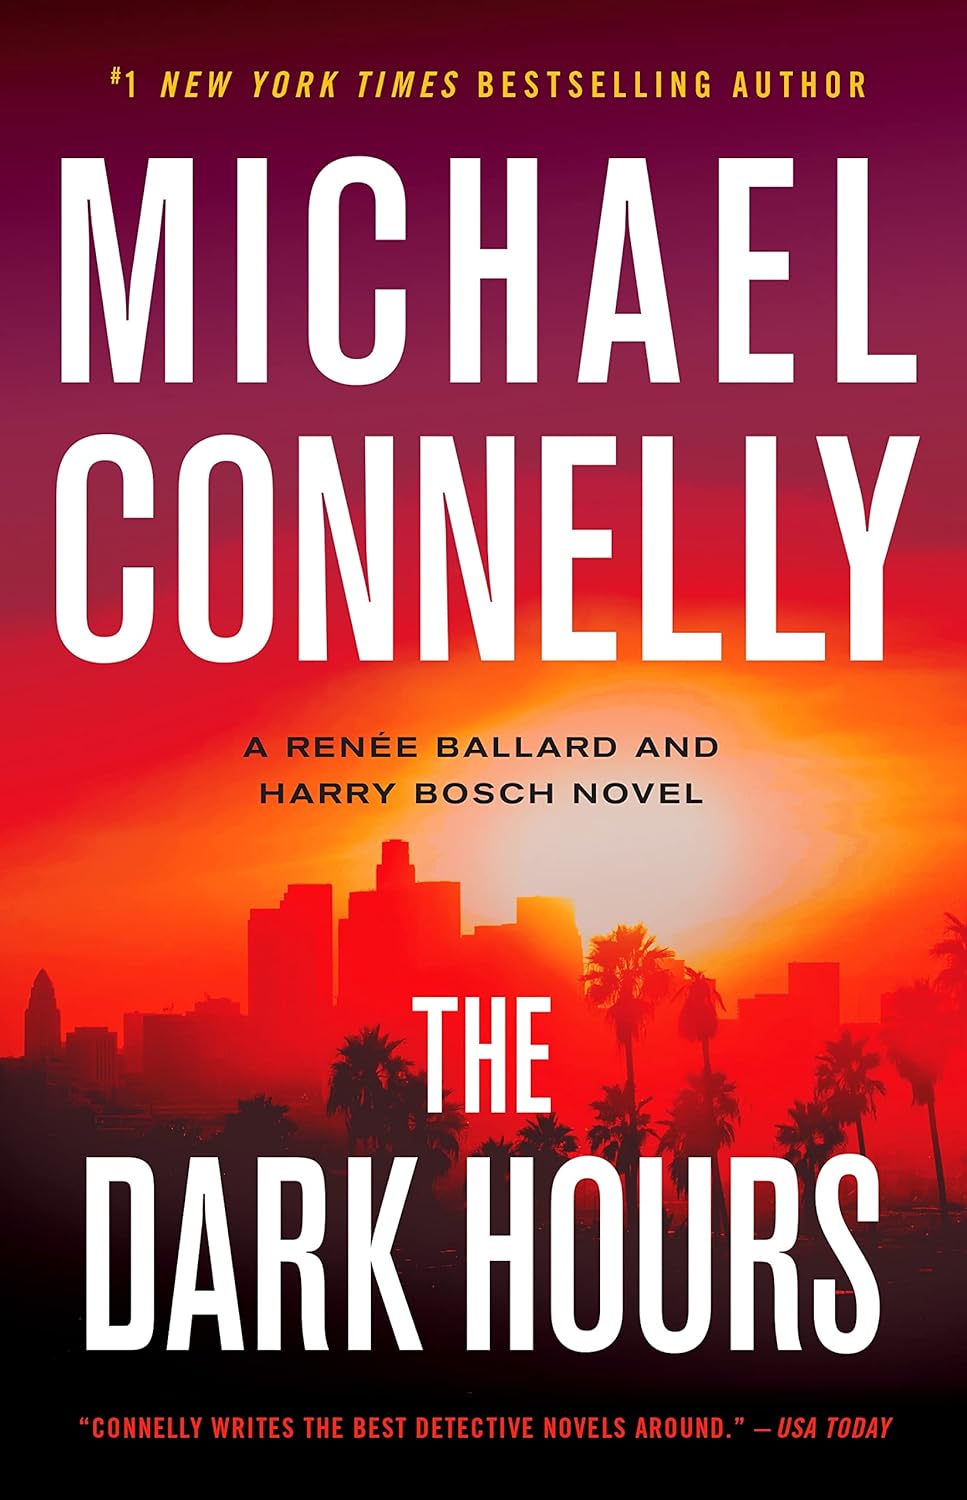 Cover image of The Dark Hours by Michael Connelly